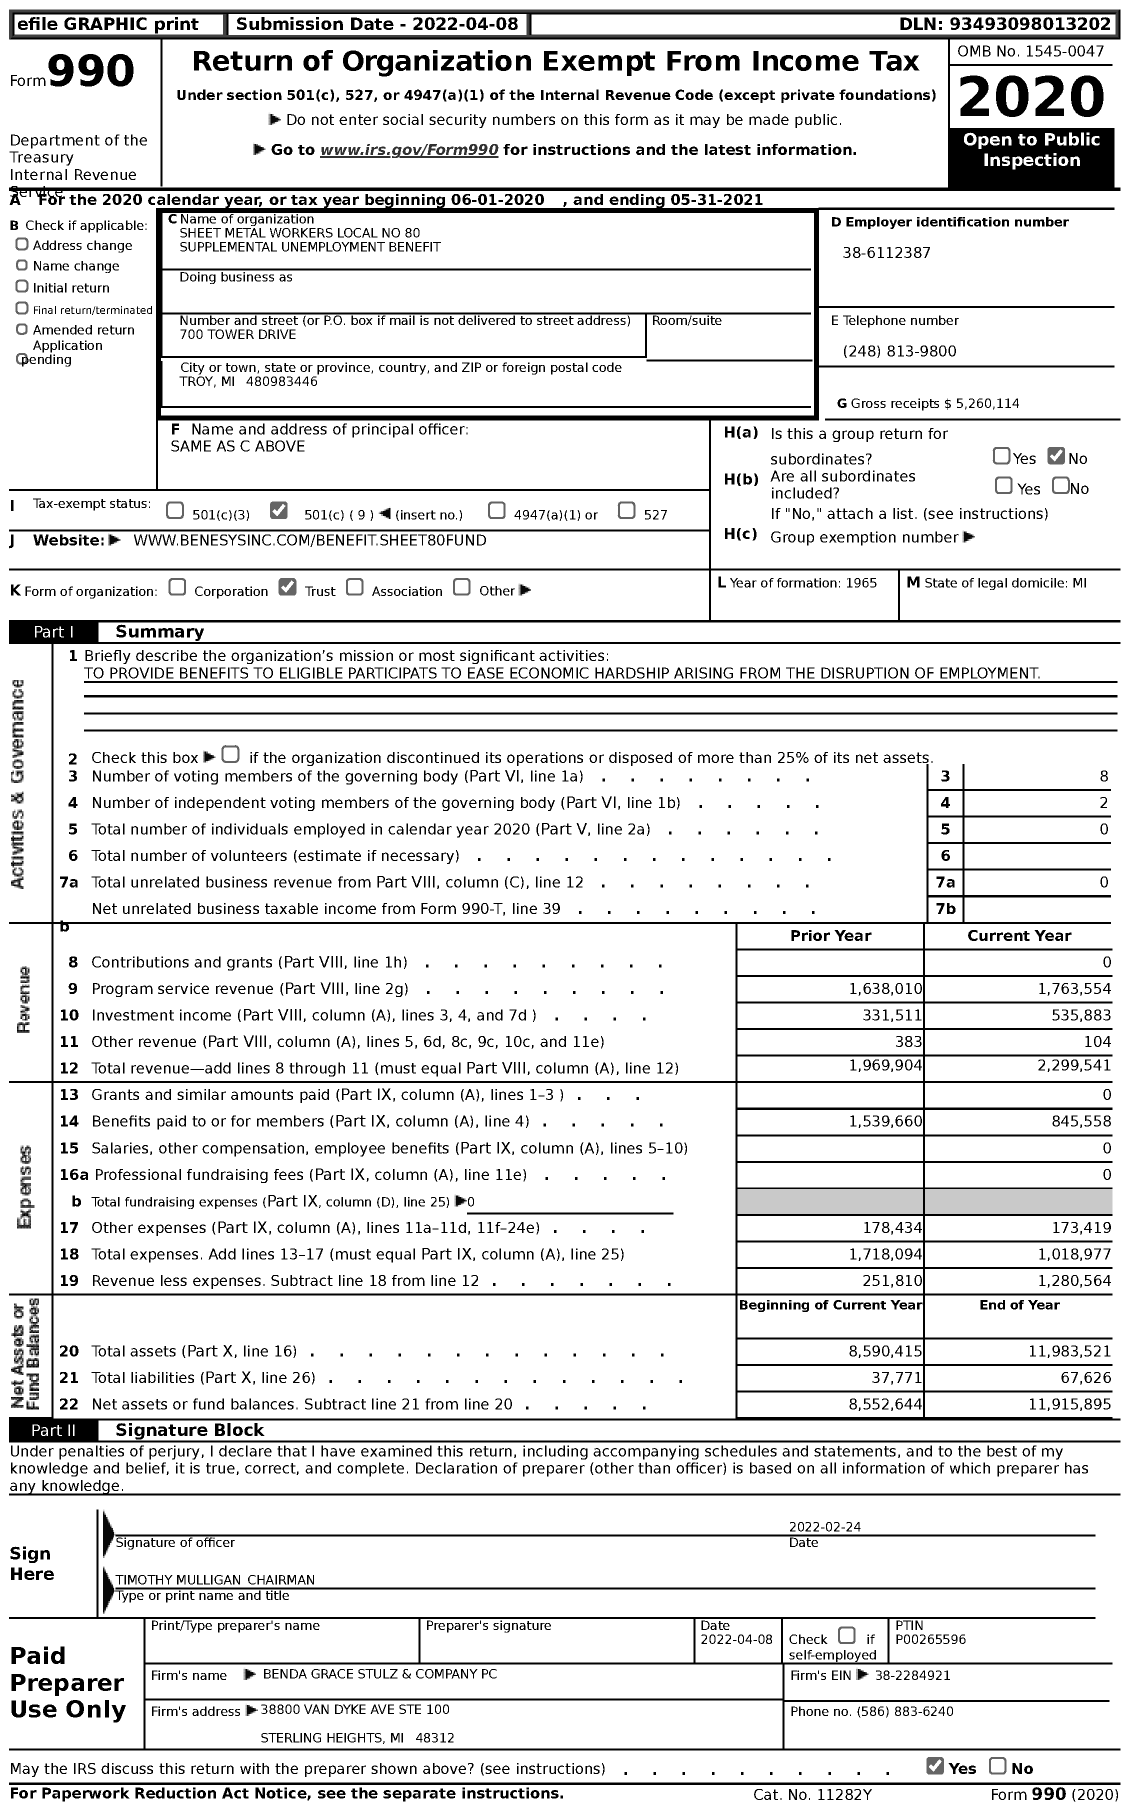 Image of first page of 2020 Form 990 for Sheet Metal Workers Local No 80 Supplemental Unemployment Benefit